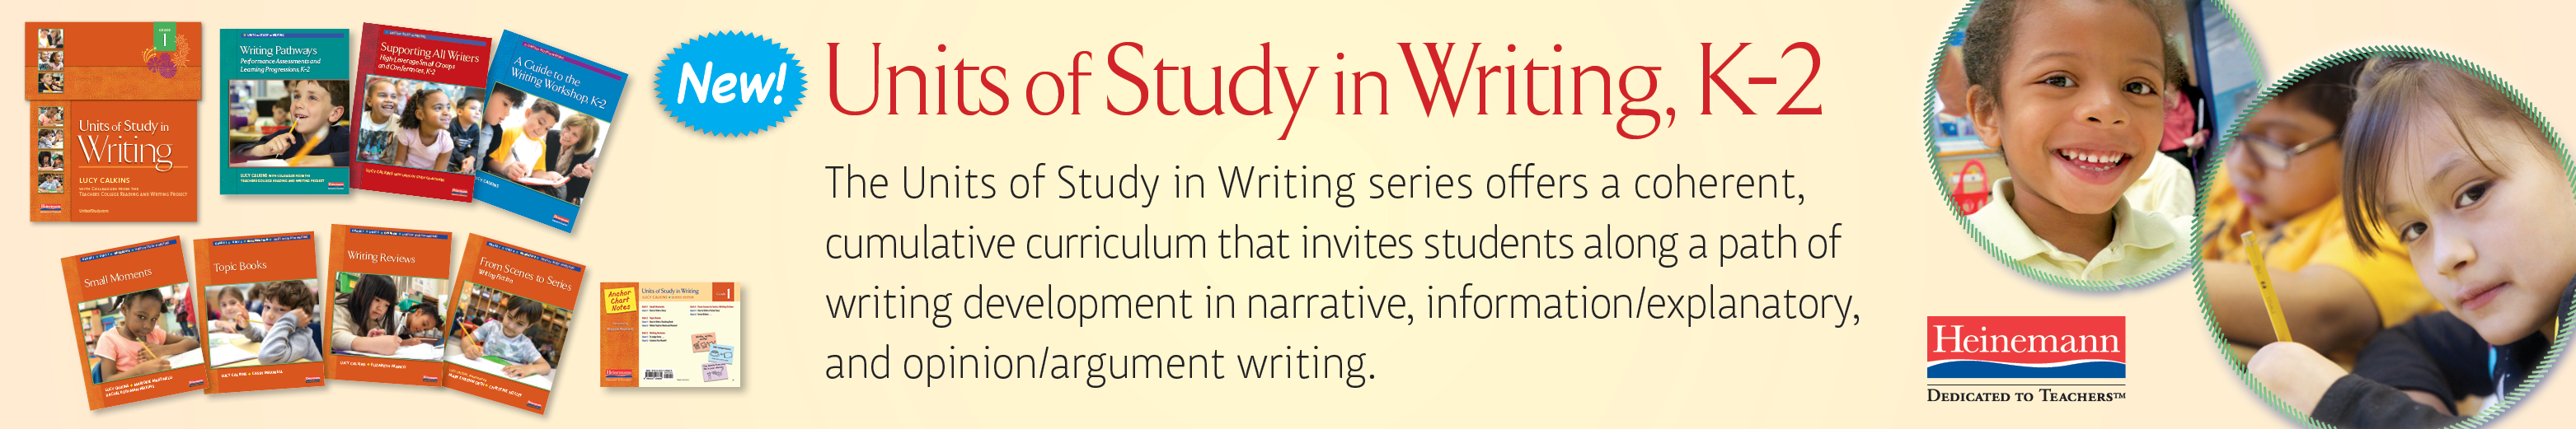 New! Units of study in writing, K2. The Units of Study in Writing series offers a coherent, culminative curriculum that invites students along a path of writing development, informative/explanatory, and opinion/argument writing. 